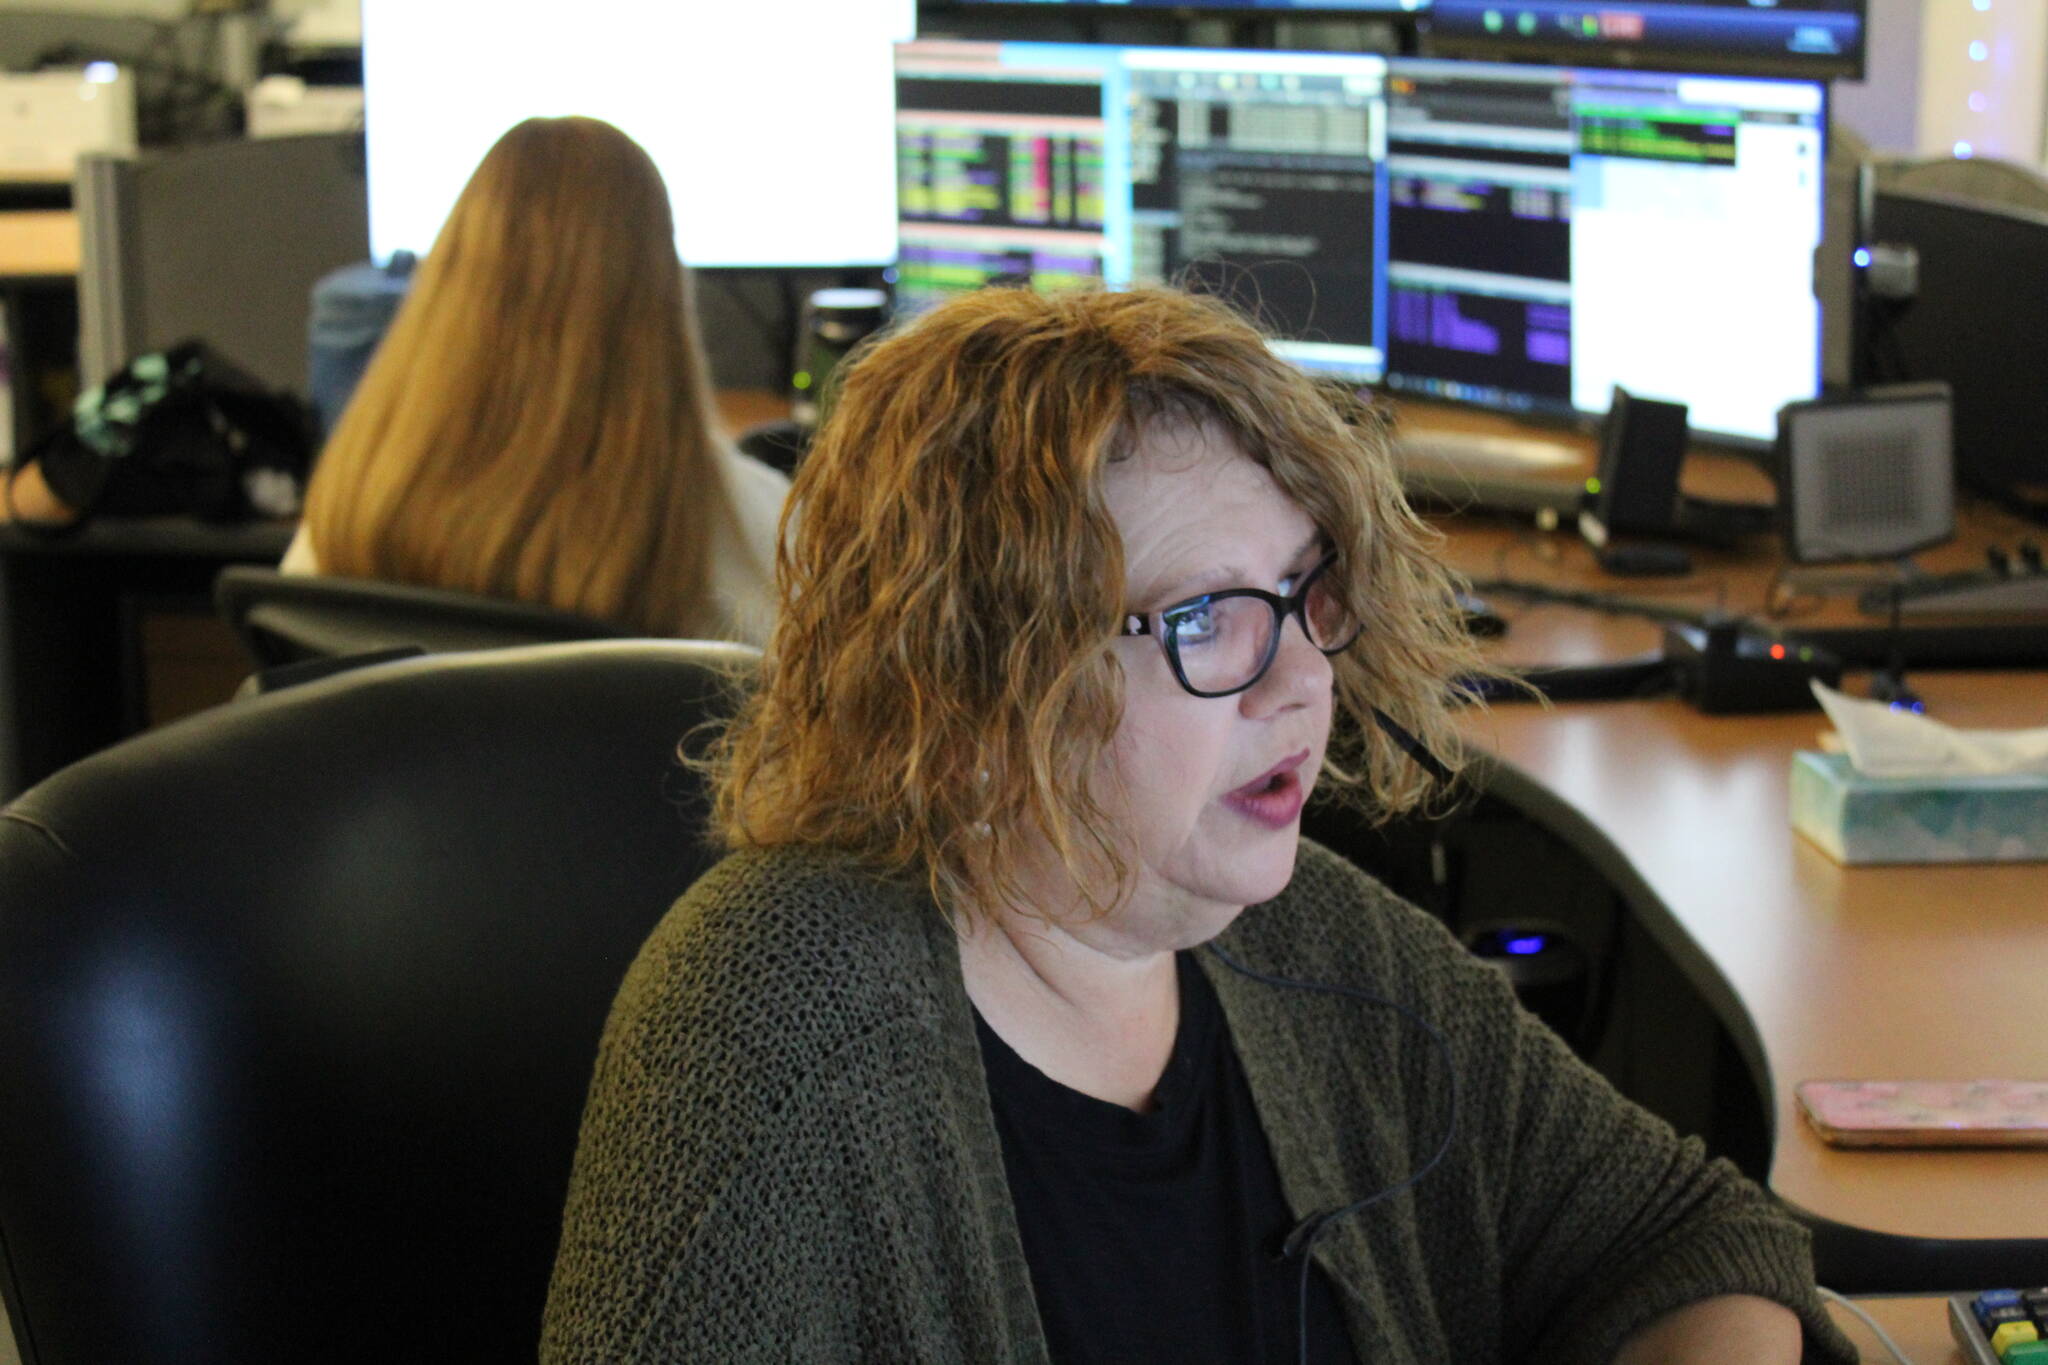 Photo by Karina Andrew/Whidbey News-Times
Dispatcher Yvette Sandefur answers calls at ICOM dispatch center Sept. 22.